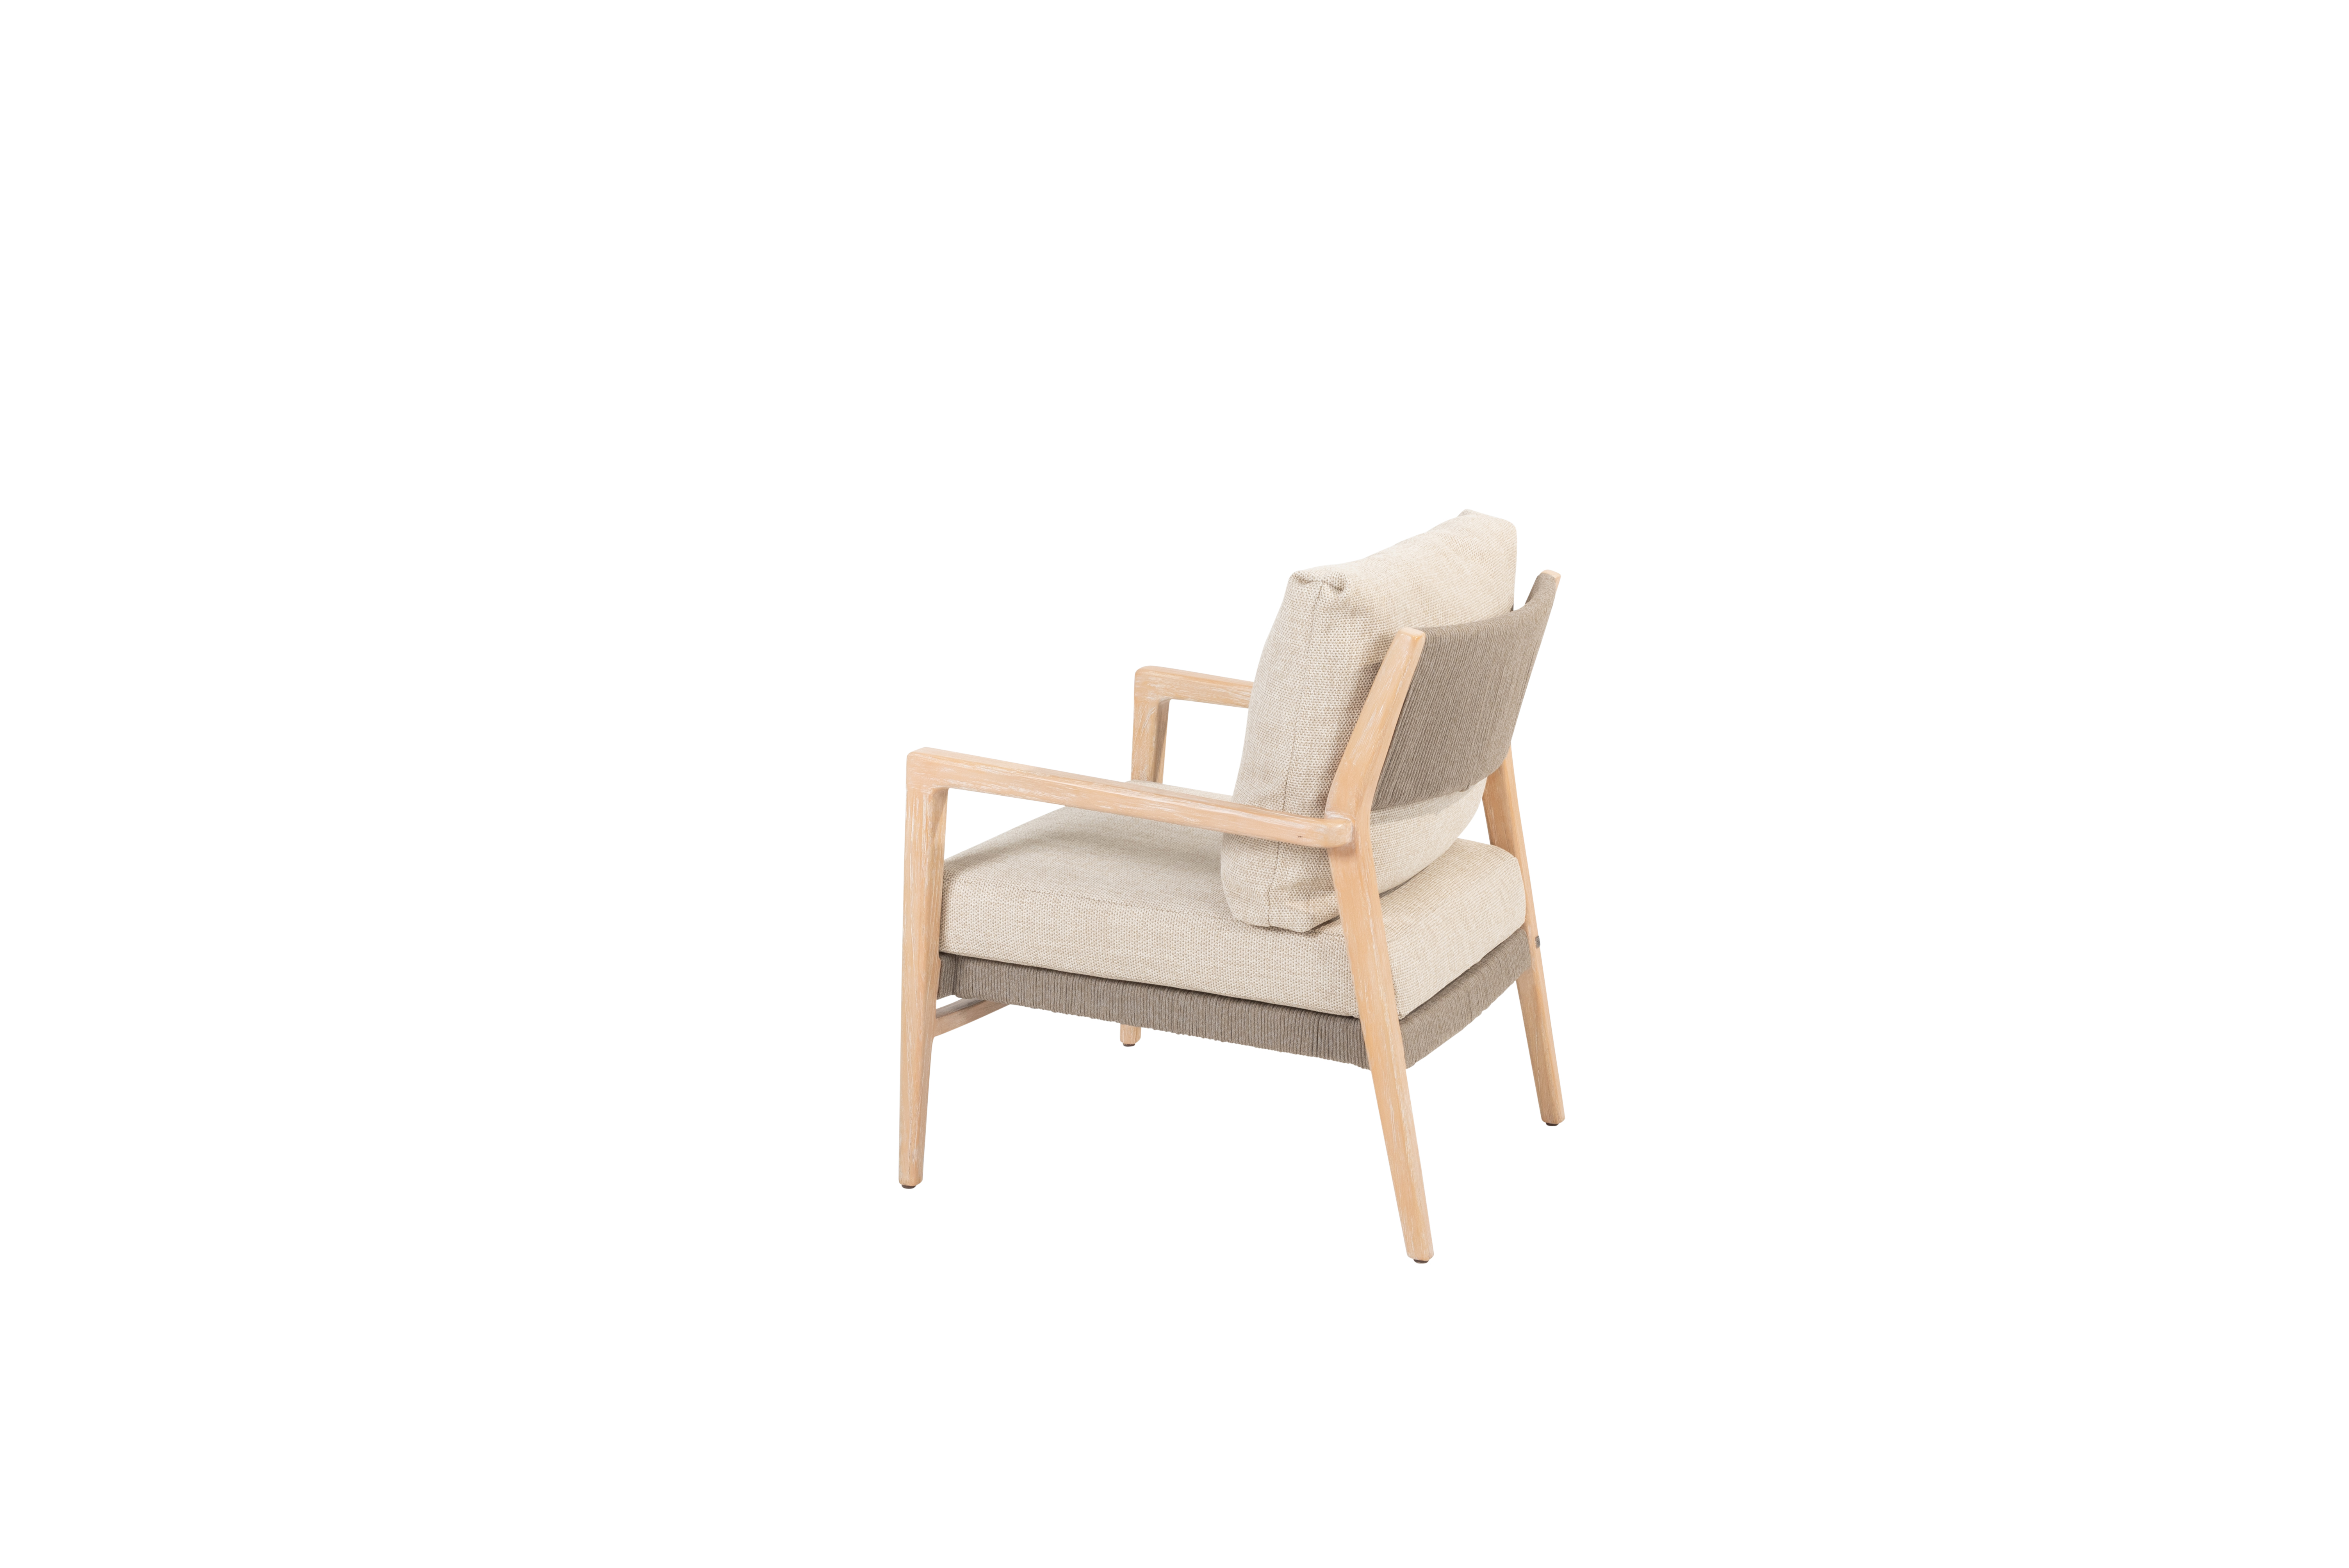 214036_ Julia low dining chair brushed teak with 2 cushions 02